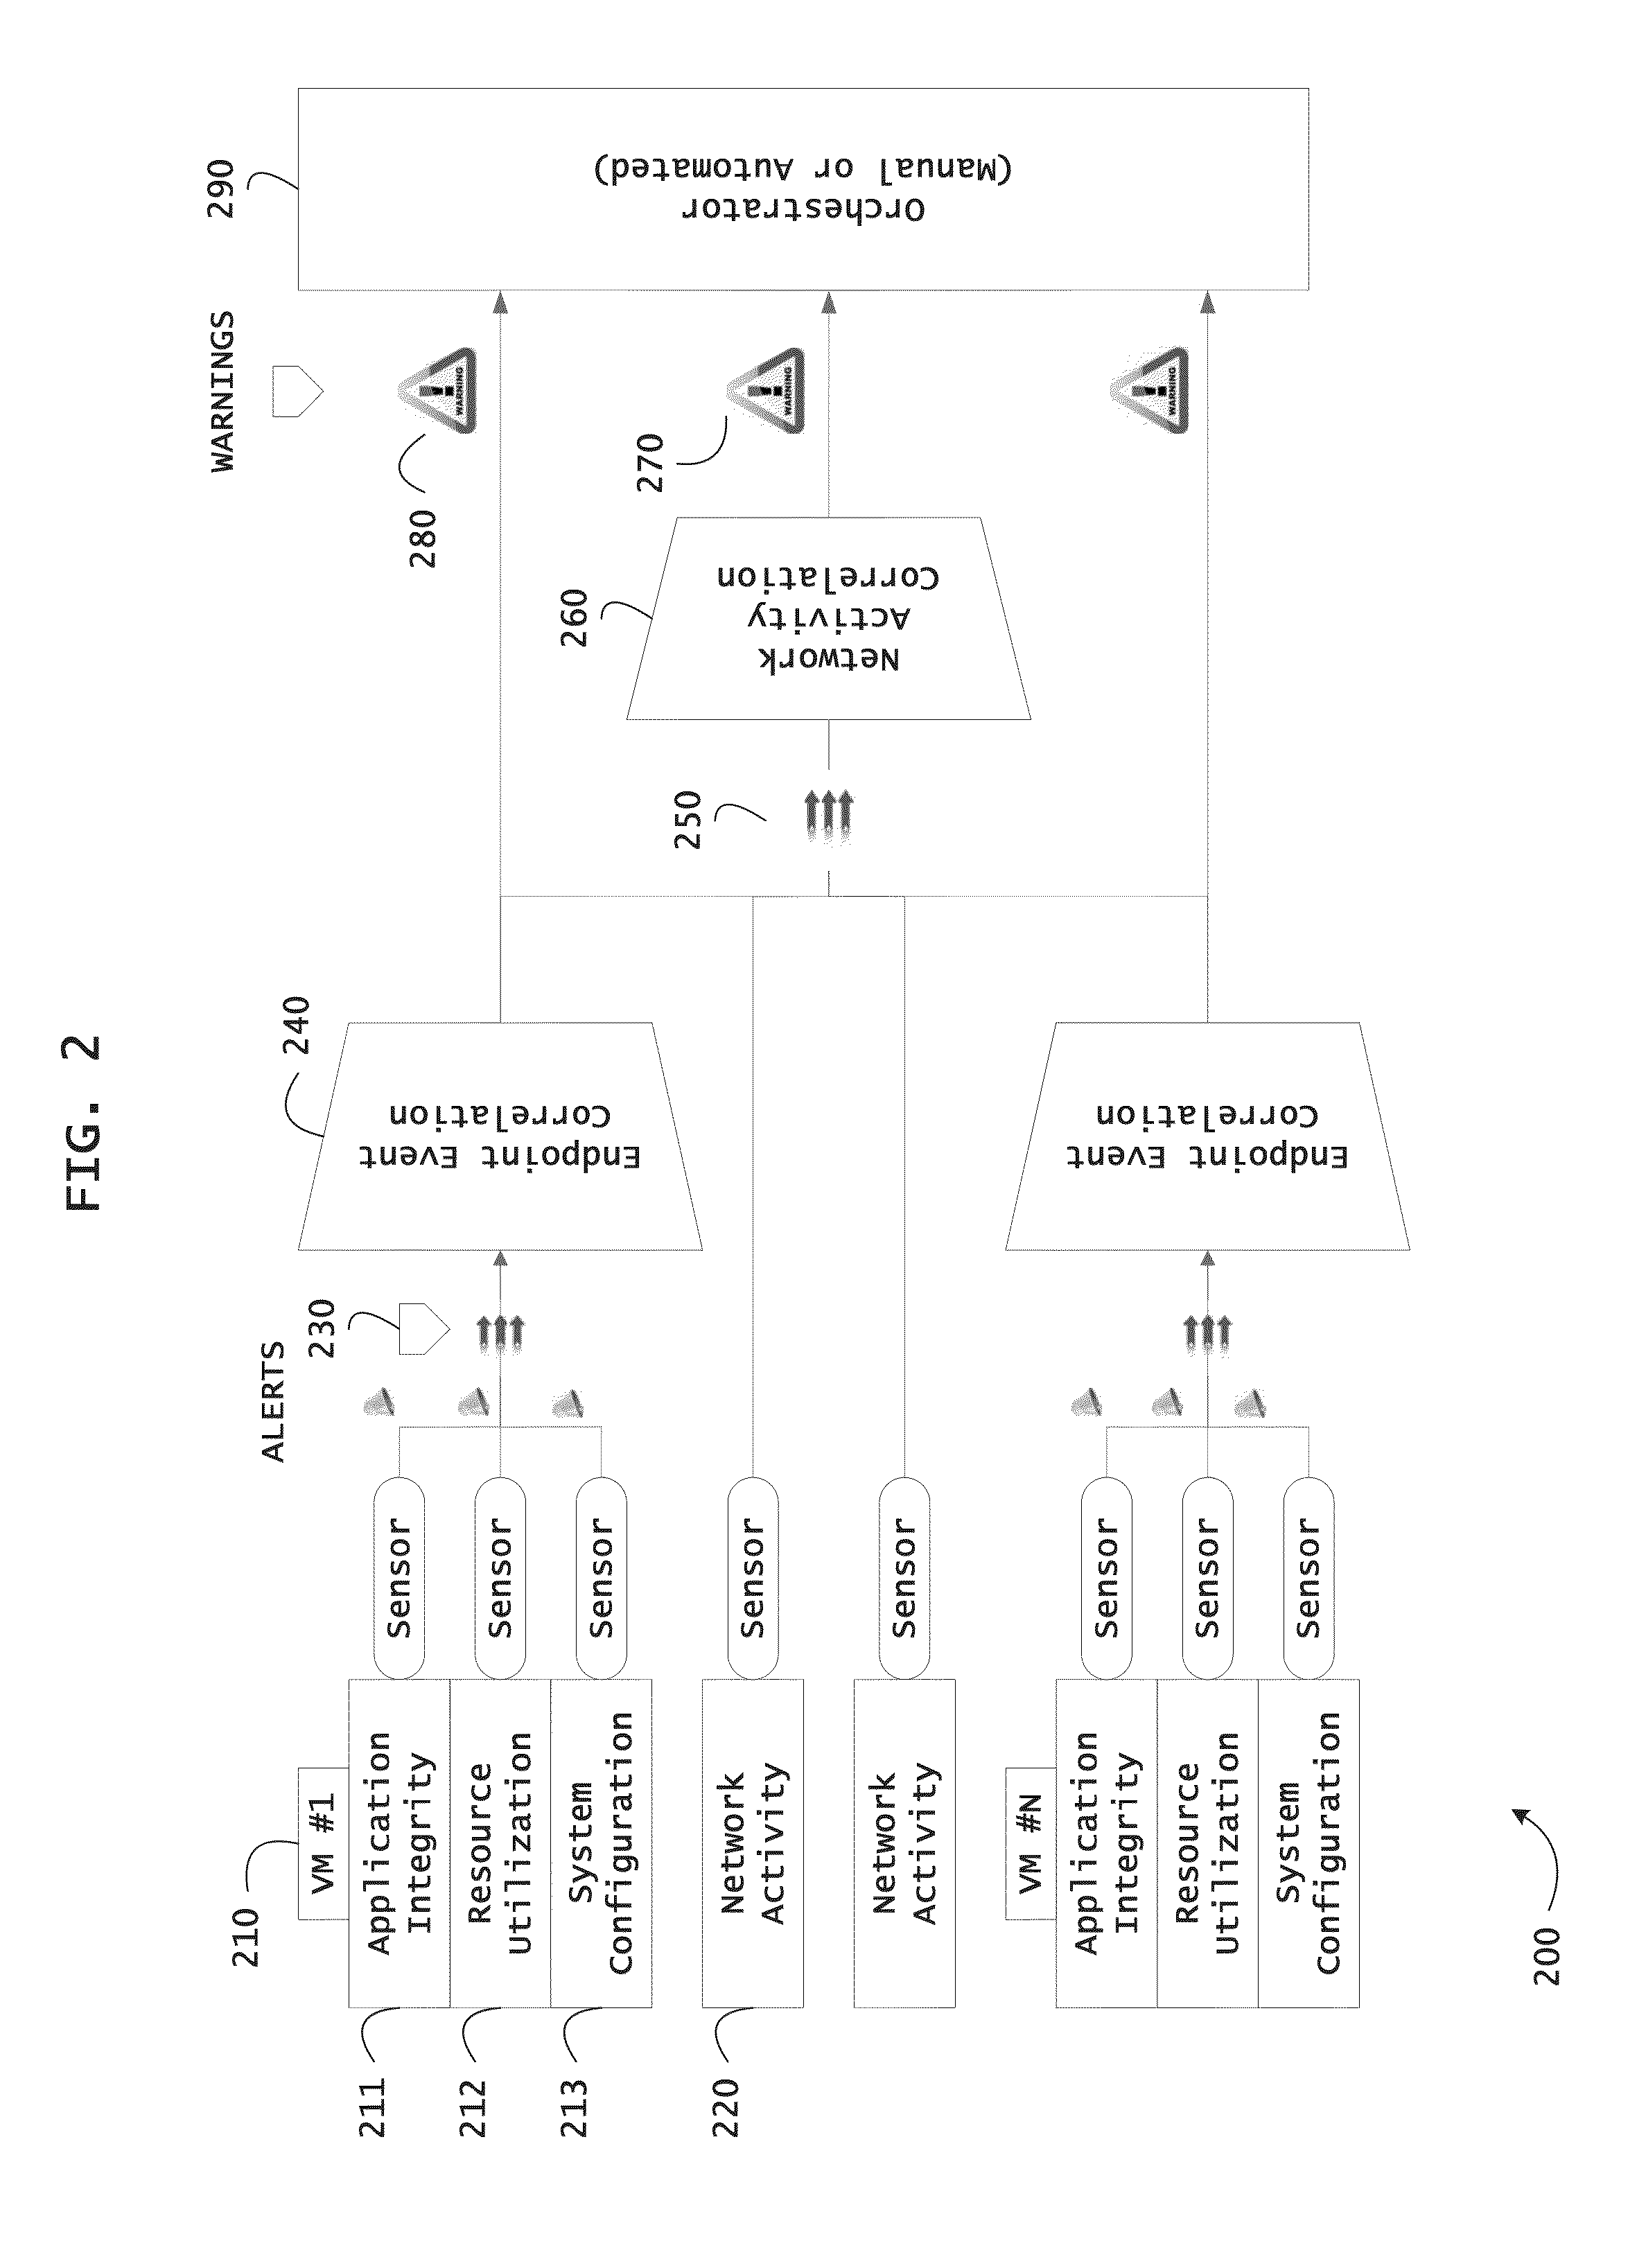 Systems and methods for providing mobile security based on dynamic attestation